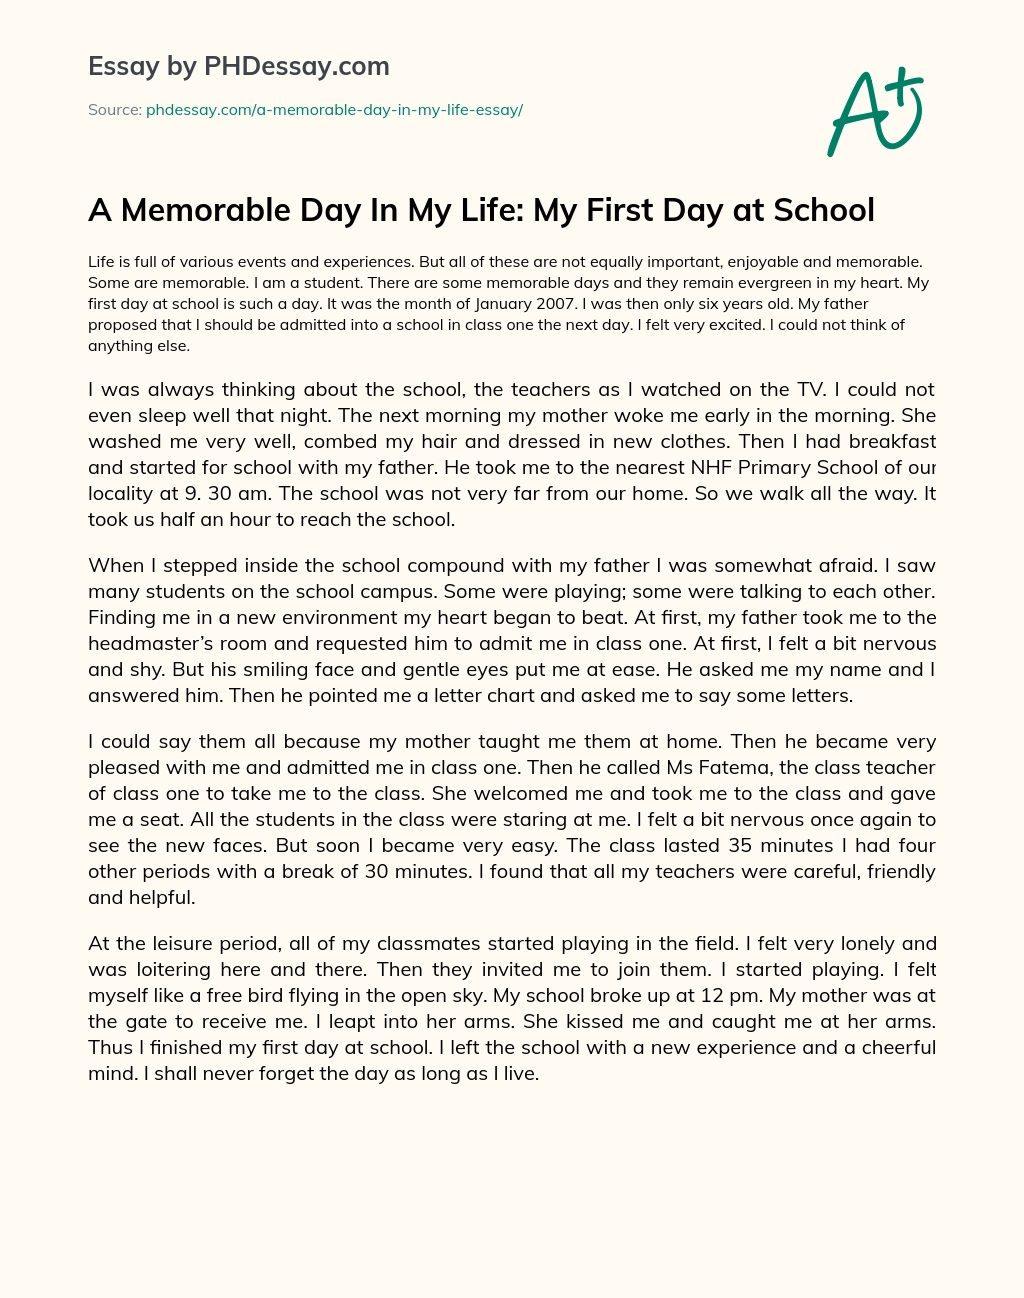 A Memorable Day In My Life: My First Day at School essay